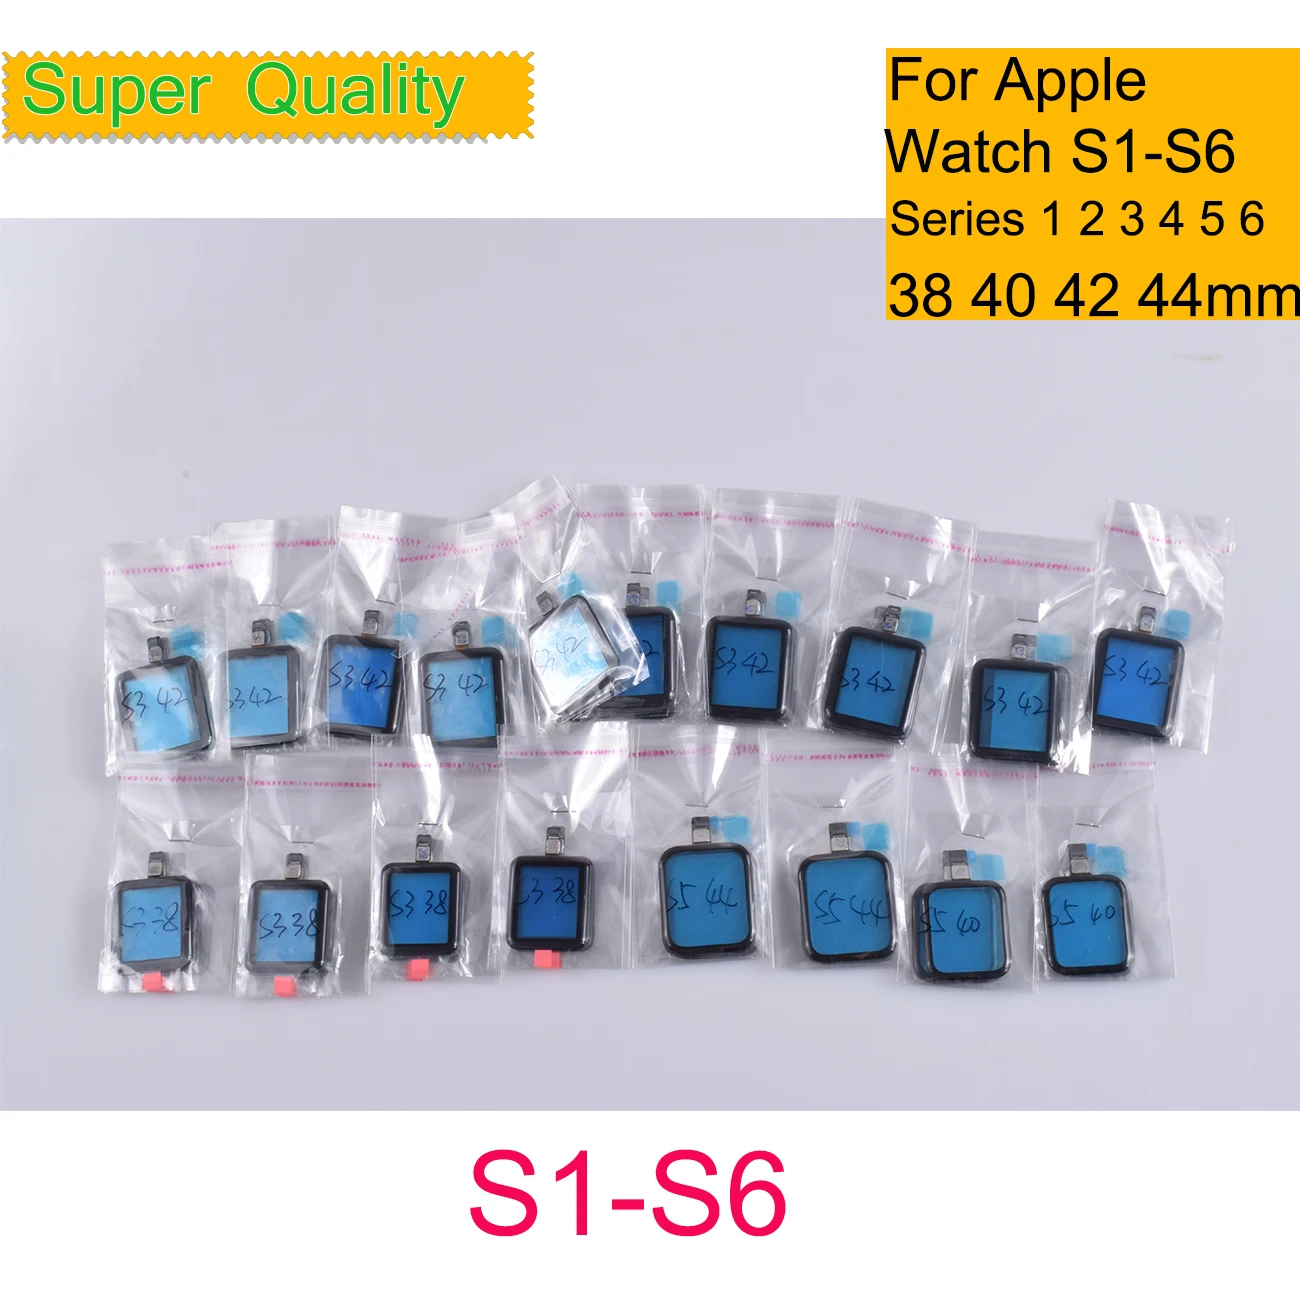 10Pcs/Lot For Apple Watch Series 1 2 3 4 5 6 SE 38mm 40mm 42mm 44mm Touch Screen Panel Digitizer Sensor Glass S1 S2 S3 S4 S5 S6